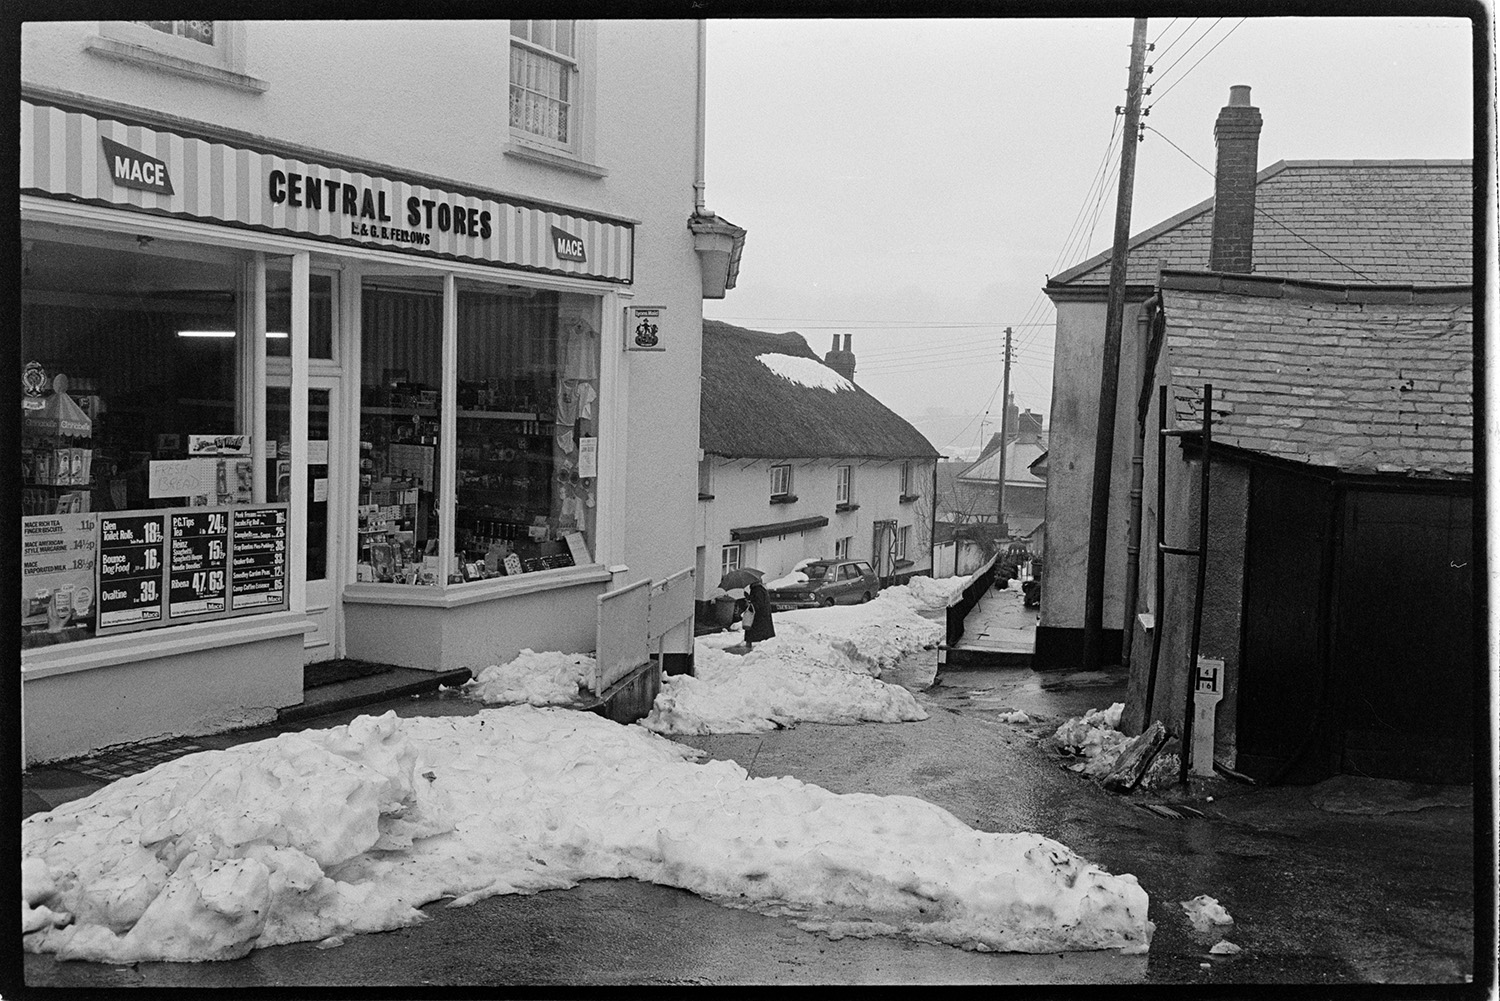 Snow. Street scenes with shops and shoppers.
[Snow in the street outside Central Stores, Winkleigh. A person walking in the snow with an umbrella past a thatched cottage can be seen further down the street.]